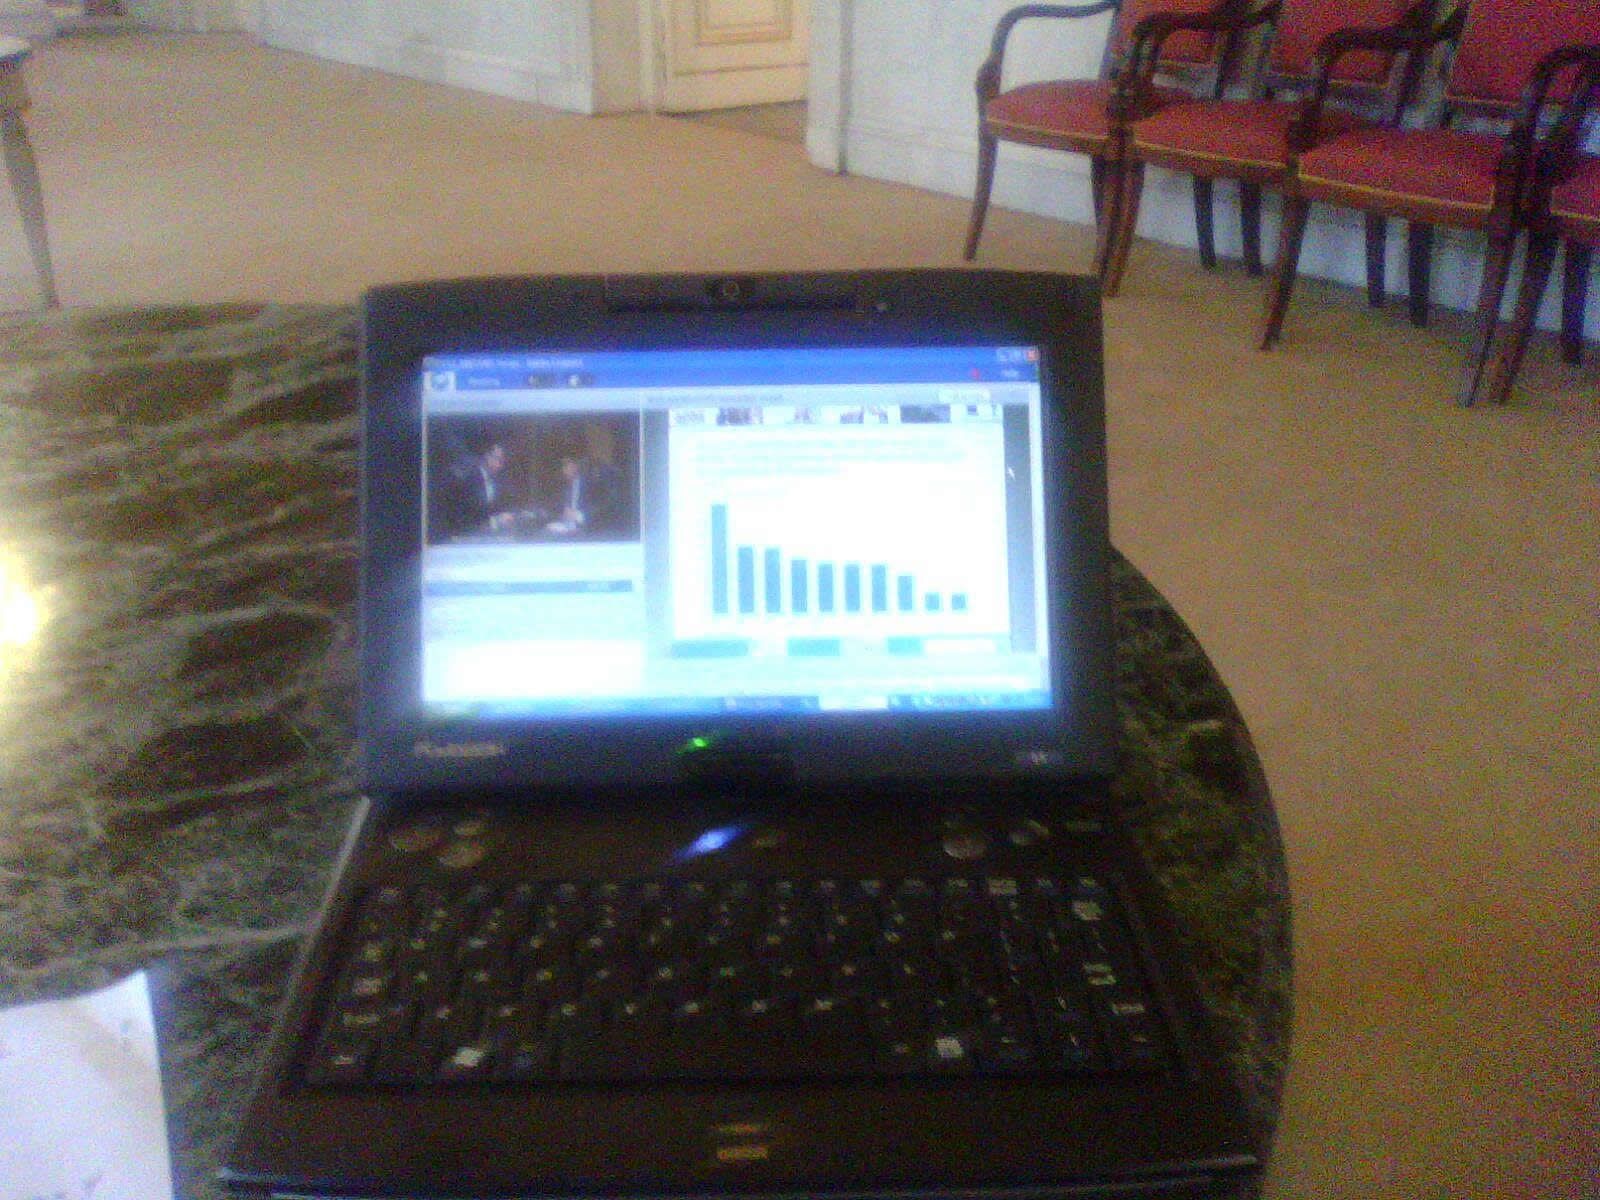 ICT progress: participating the webcast on European labour market perspectives during the symposium 